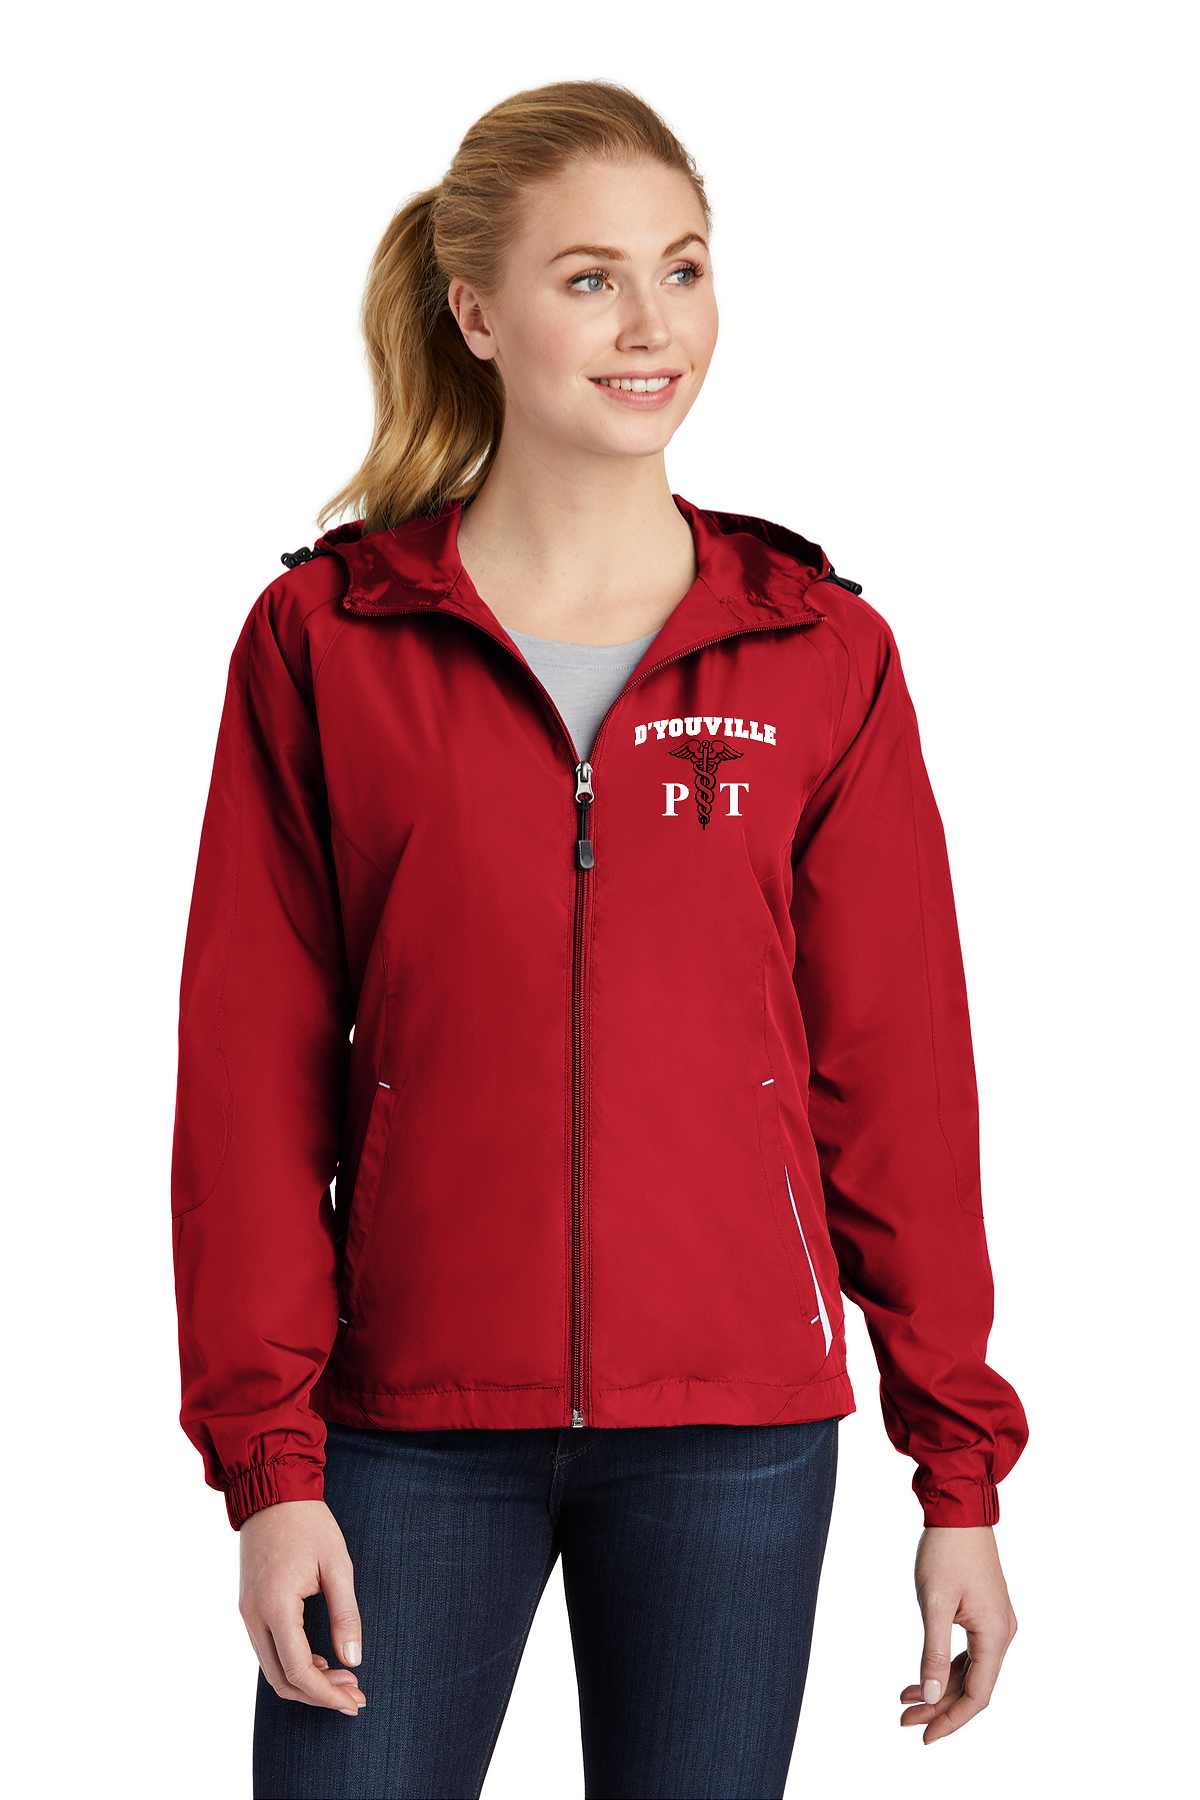 D'Youville Physical Therapy Sport-Tek® Ladies Colorblock Hooded Raglan Jacket